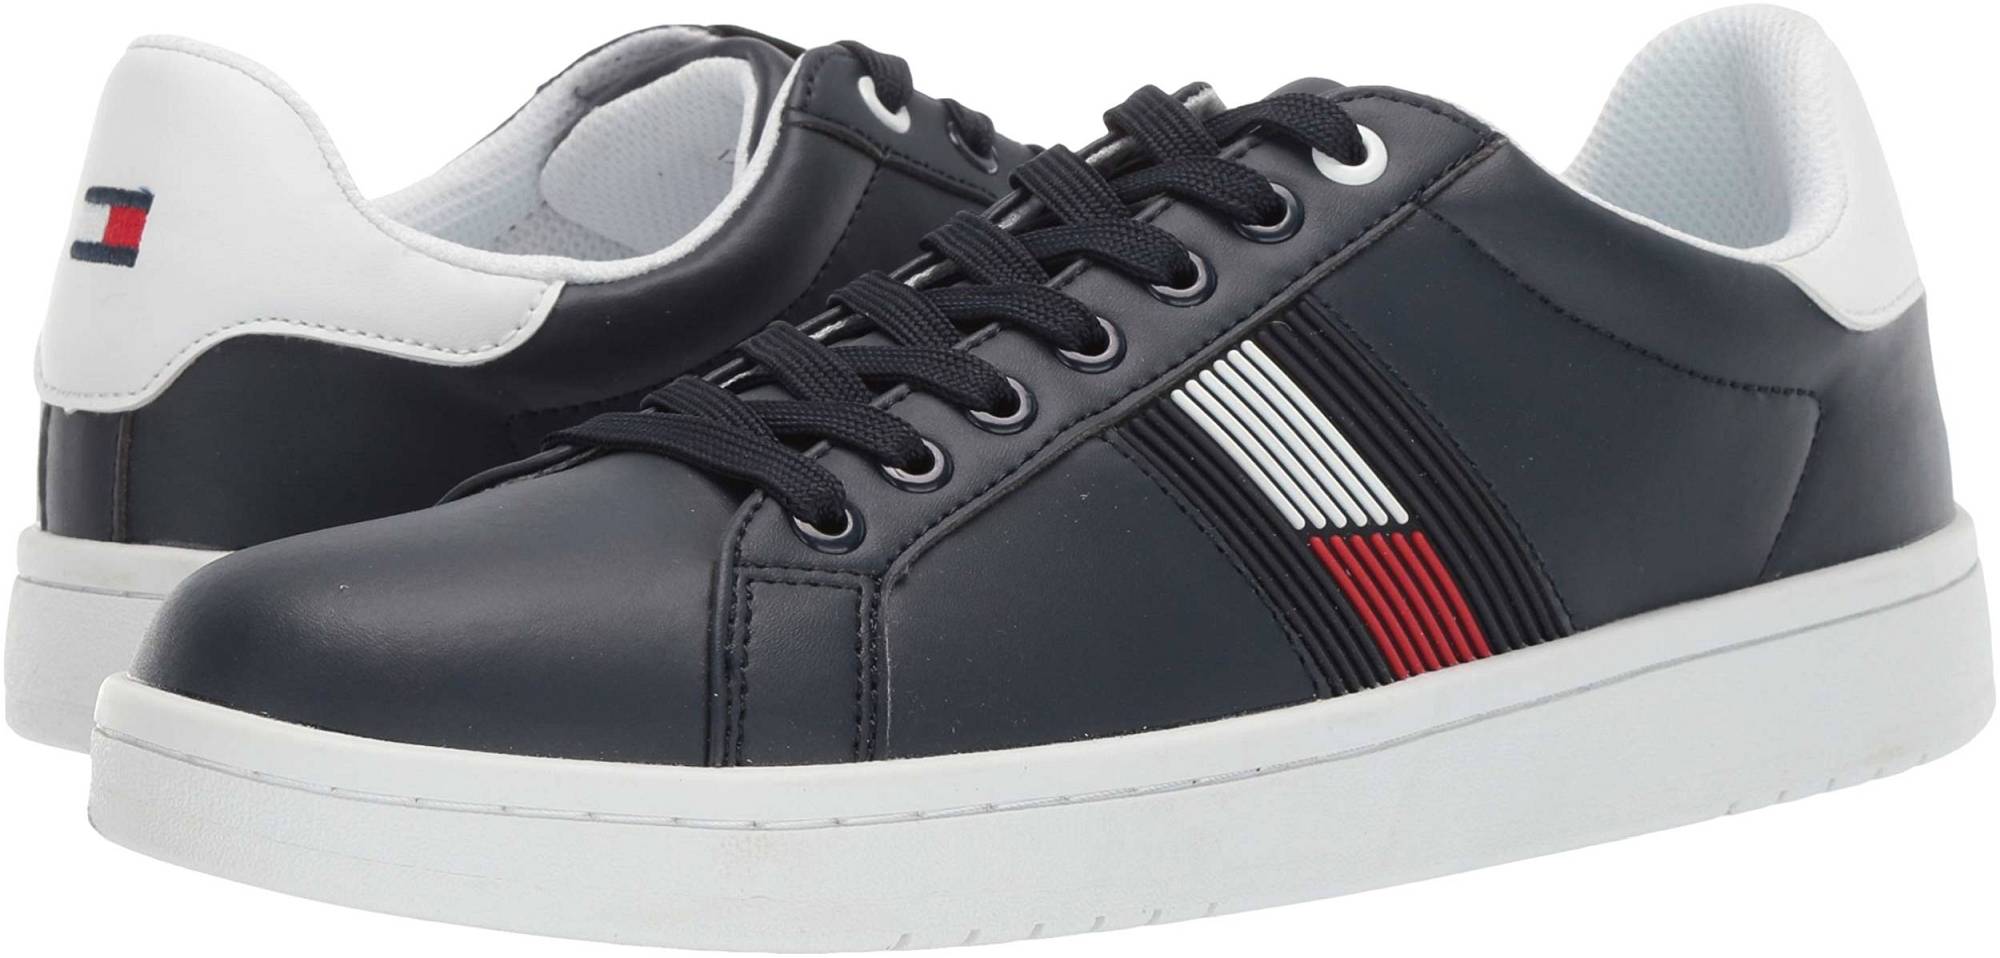 Tommy Hilfiger Lakely – Shoes Reviews & Reasons To Buy